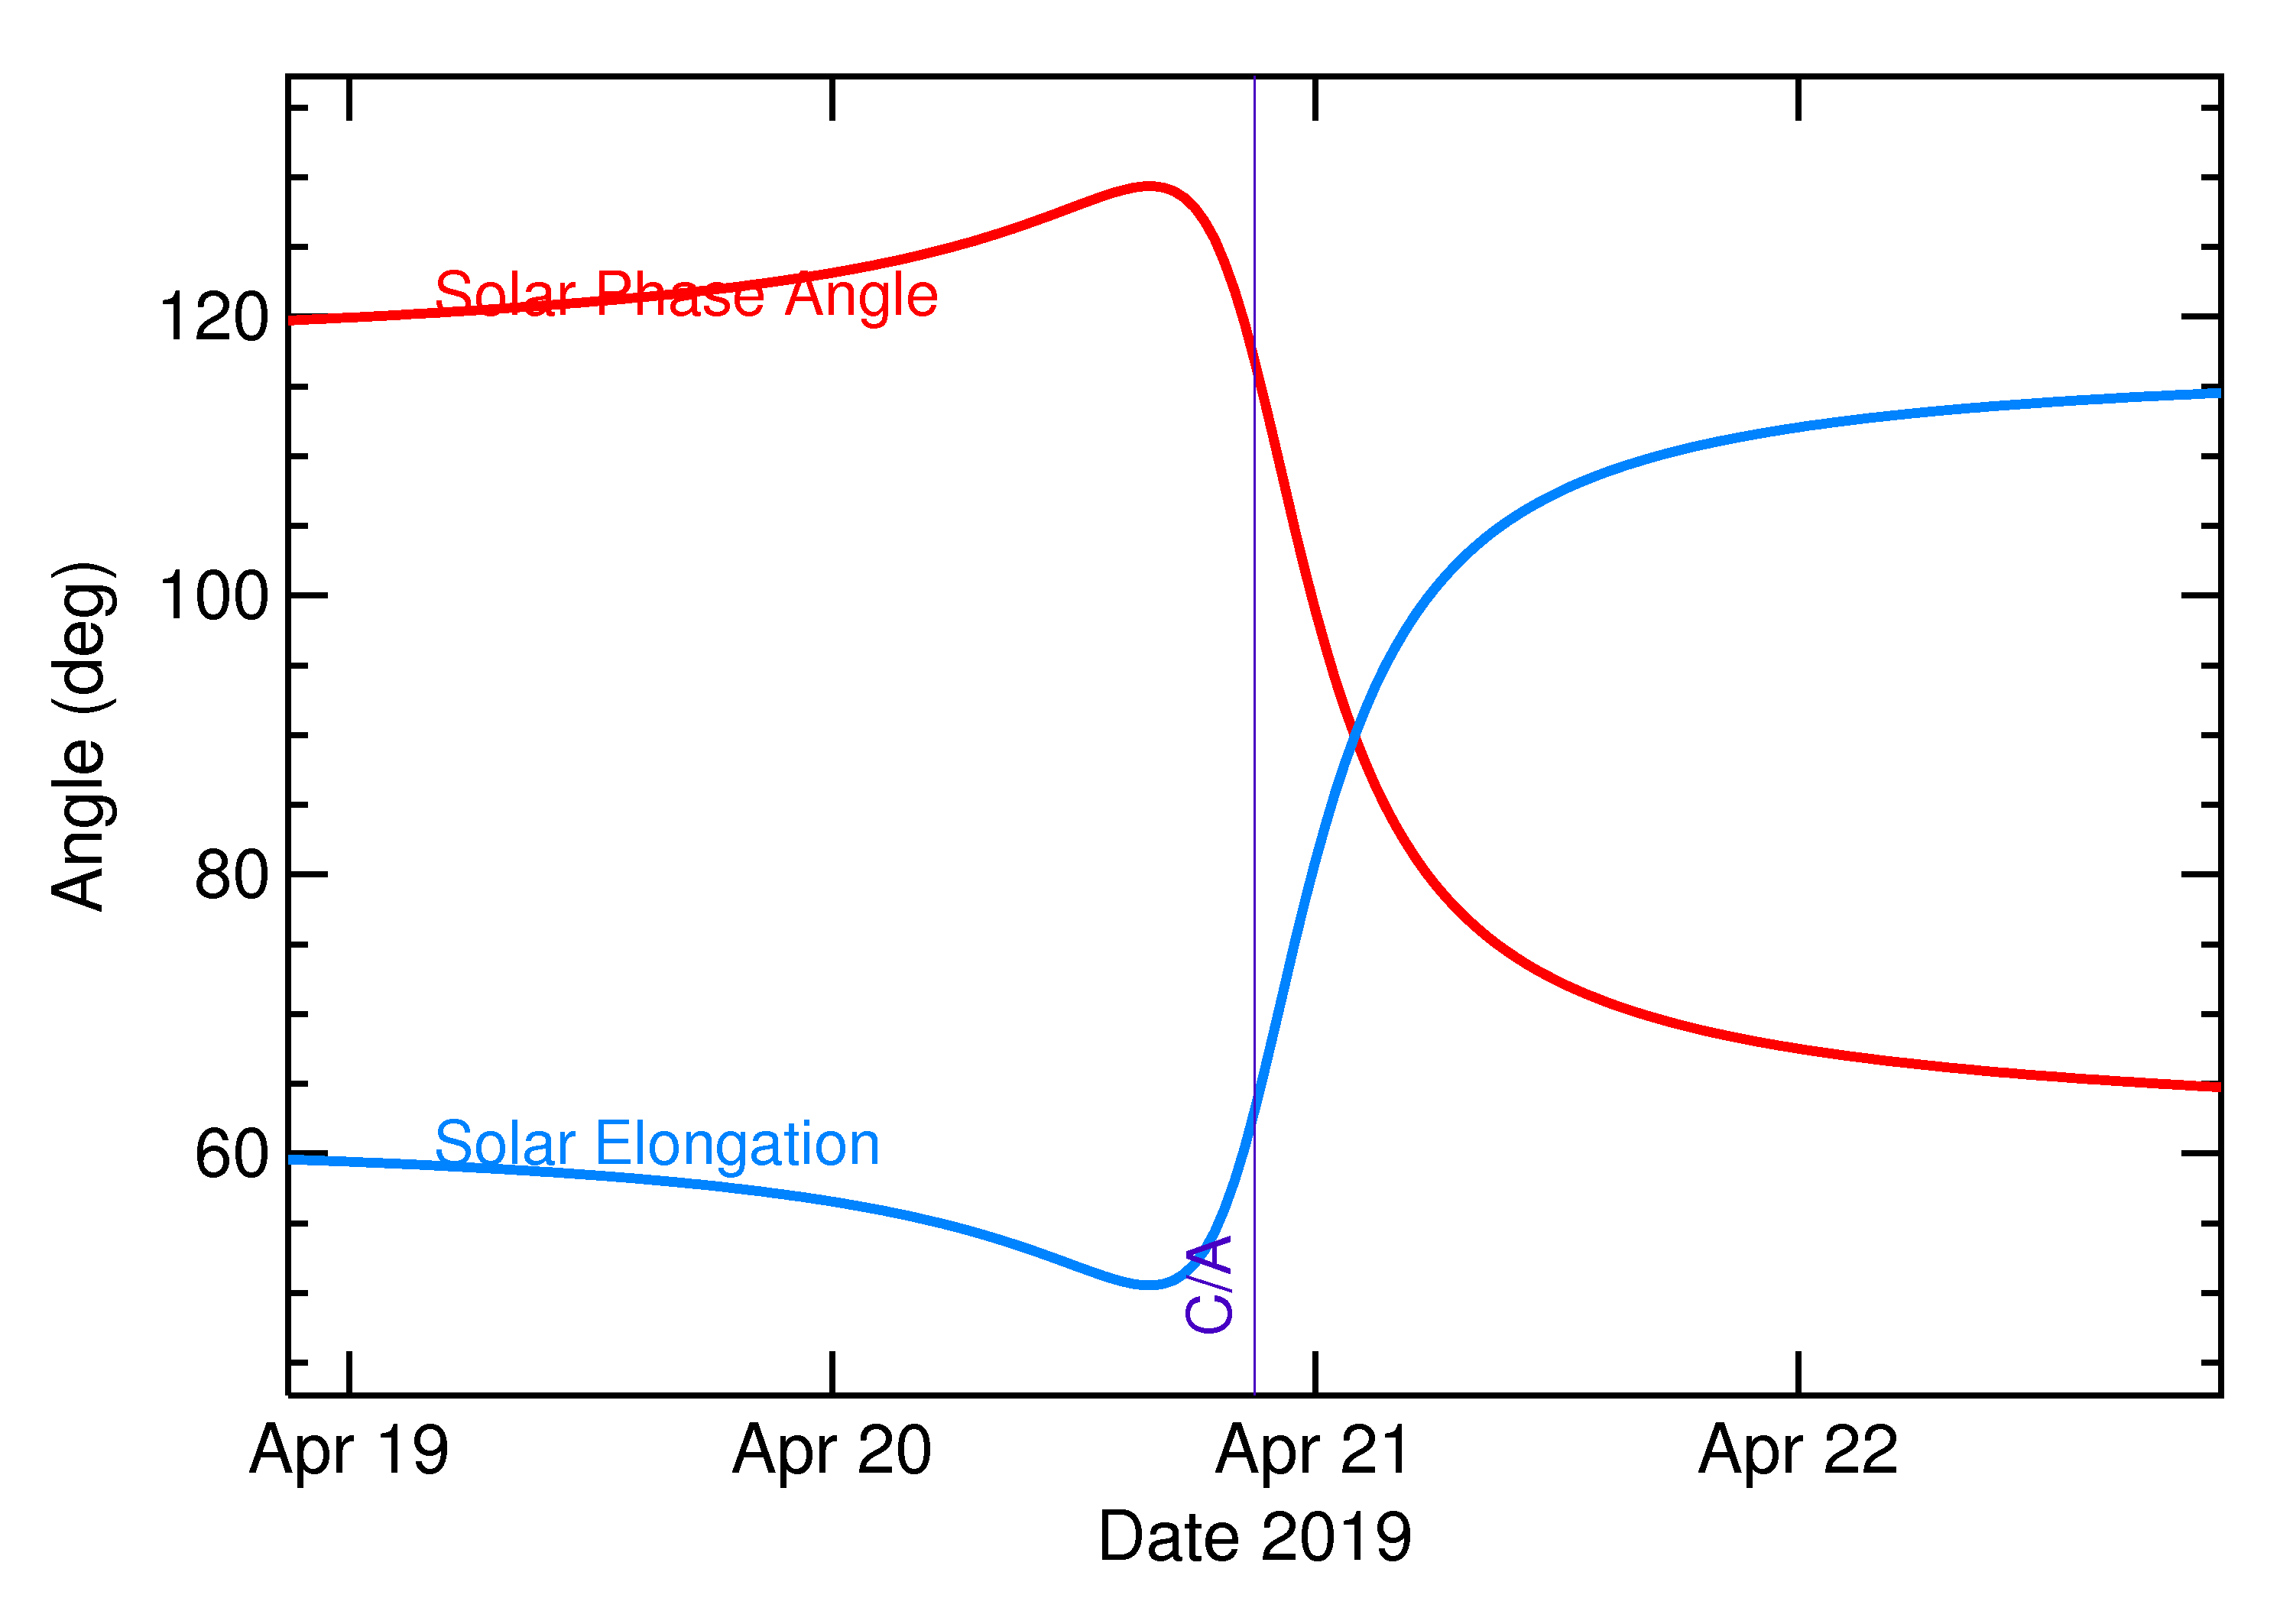 Solar Elongation and Solar Phase Angle of 2019 HE in the days around closest approach